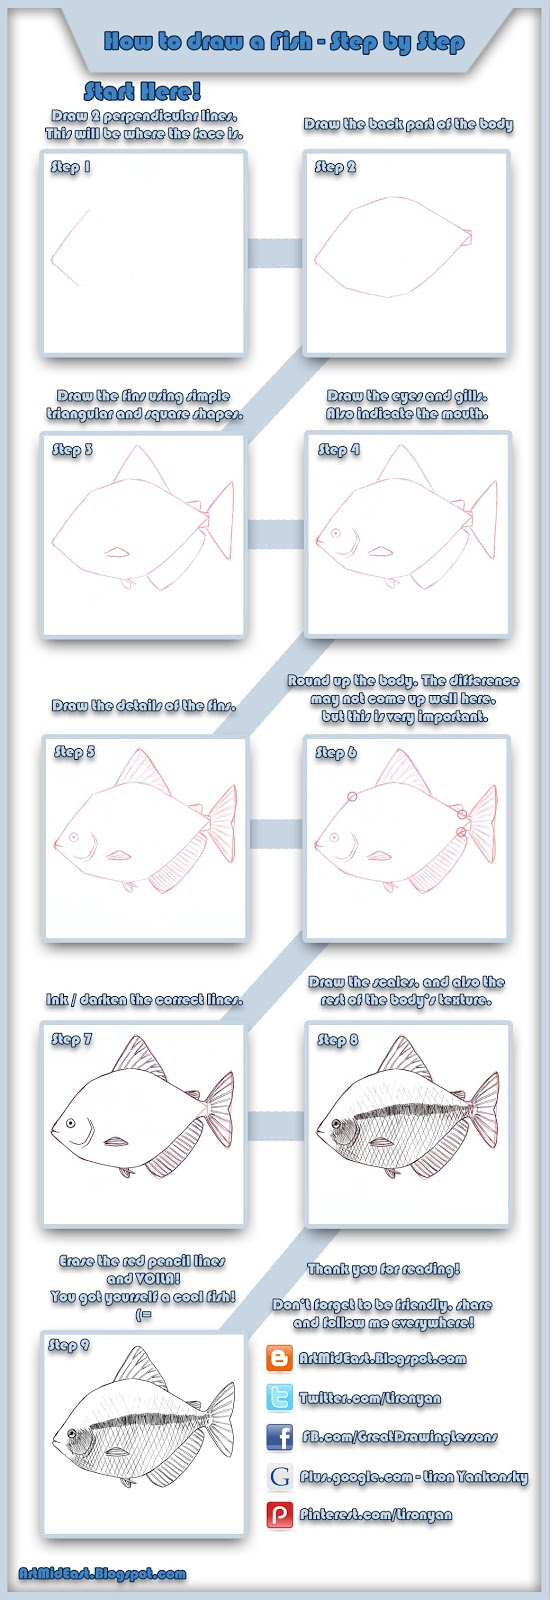 How to Draw a Fish Using Simple Shapes